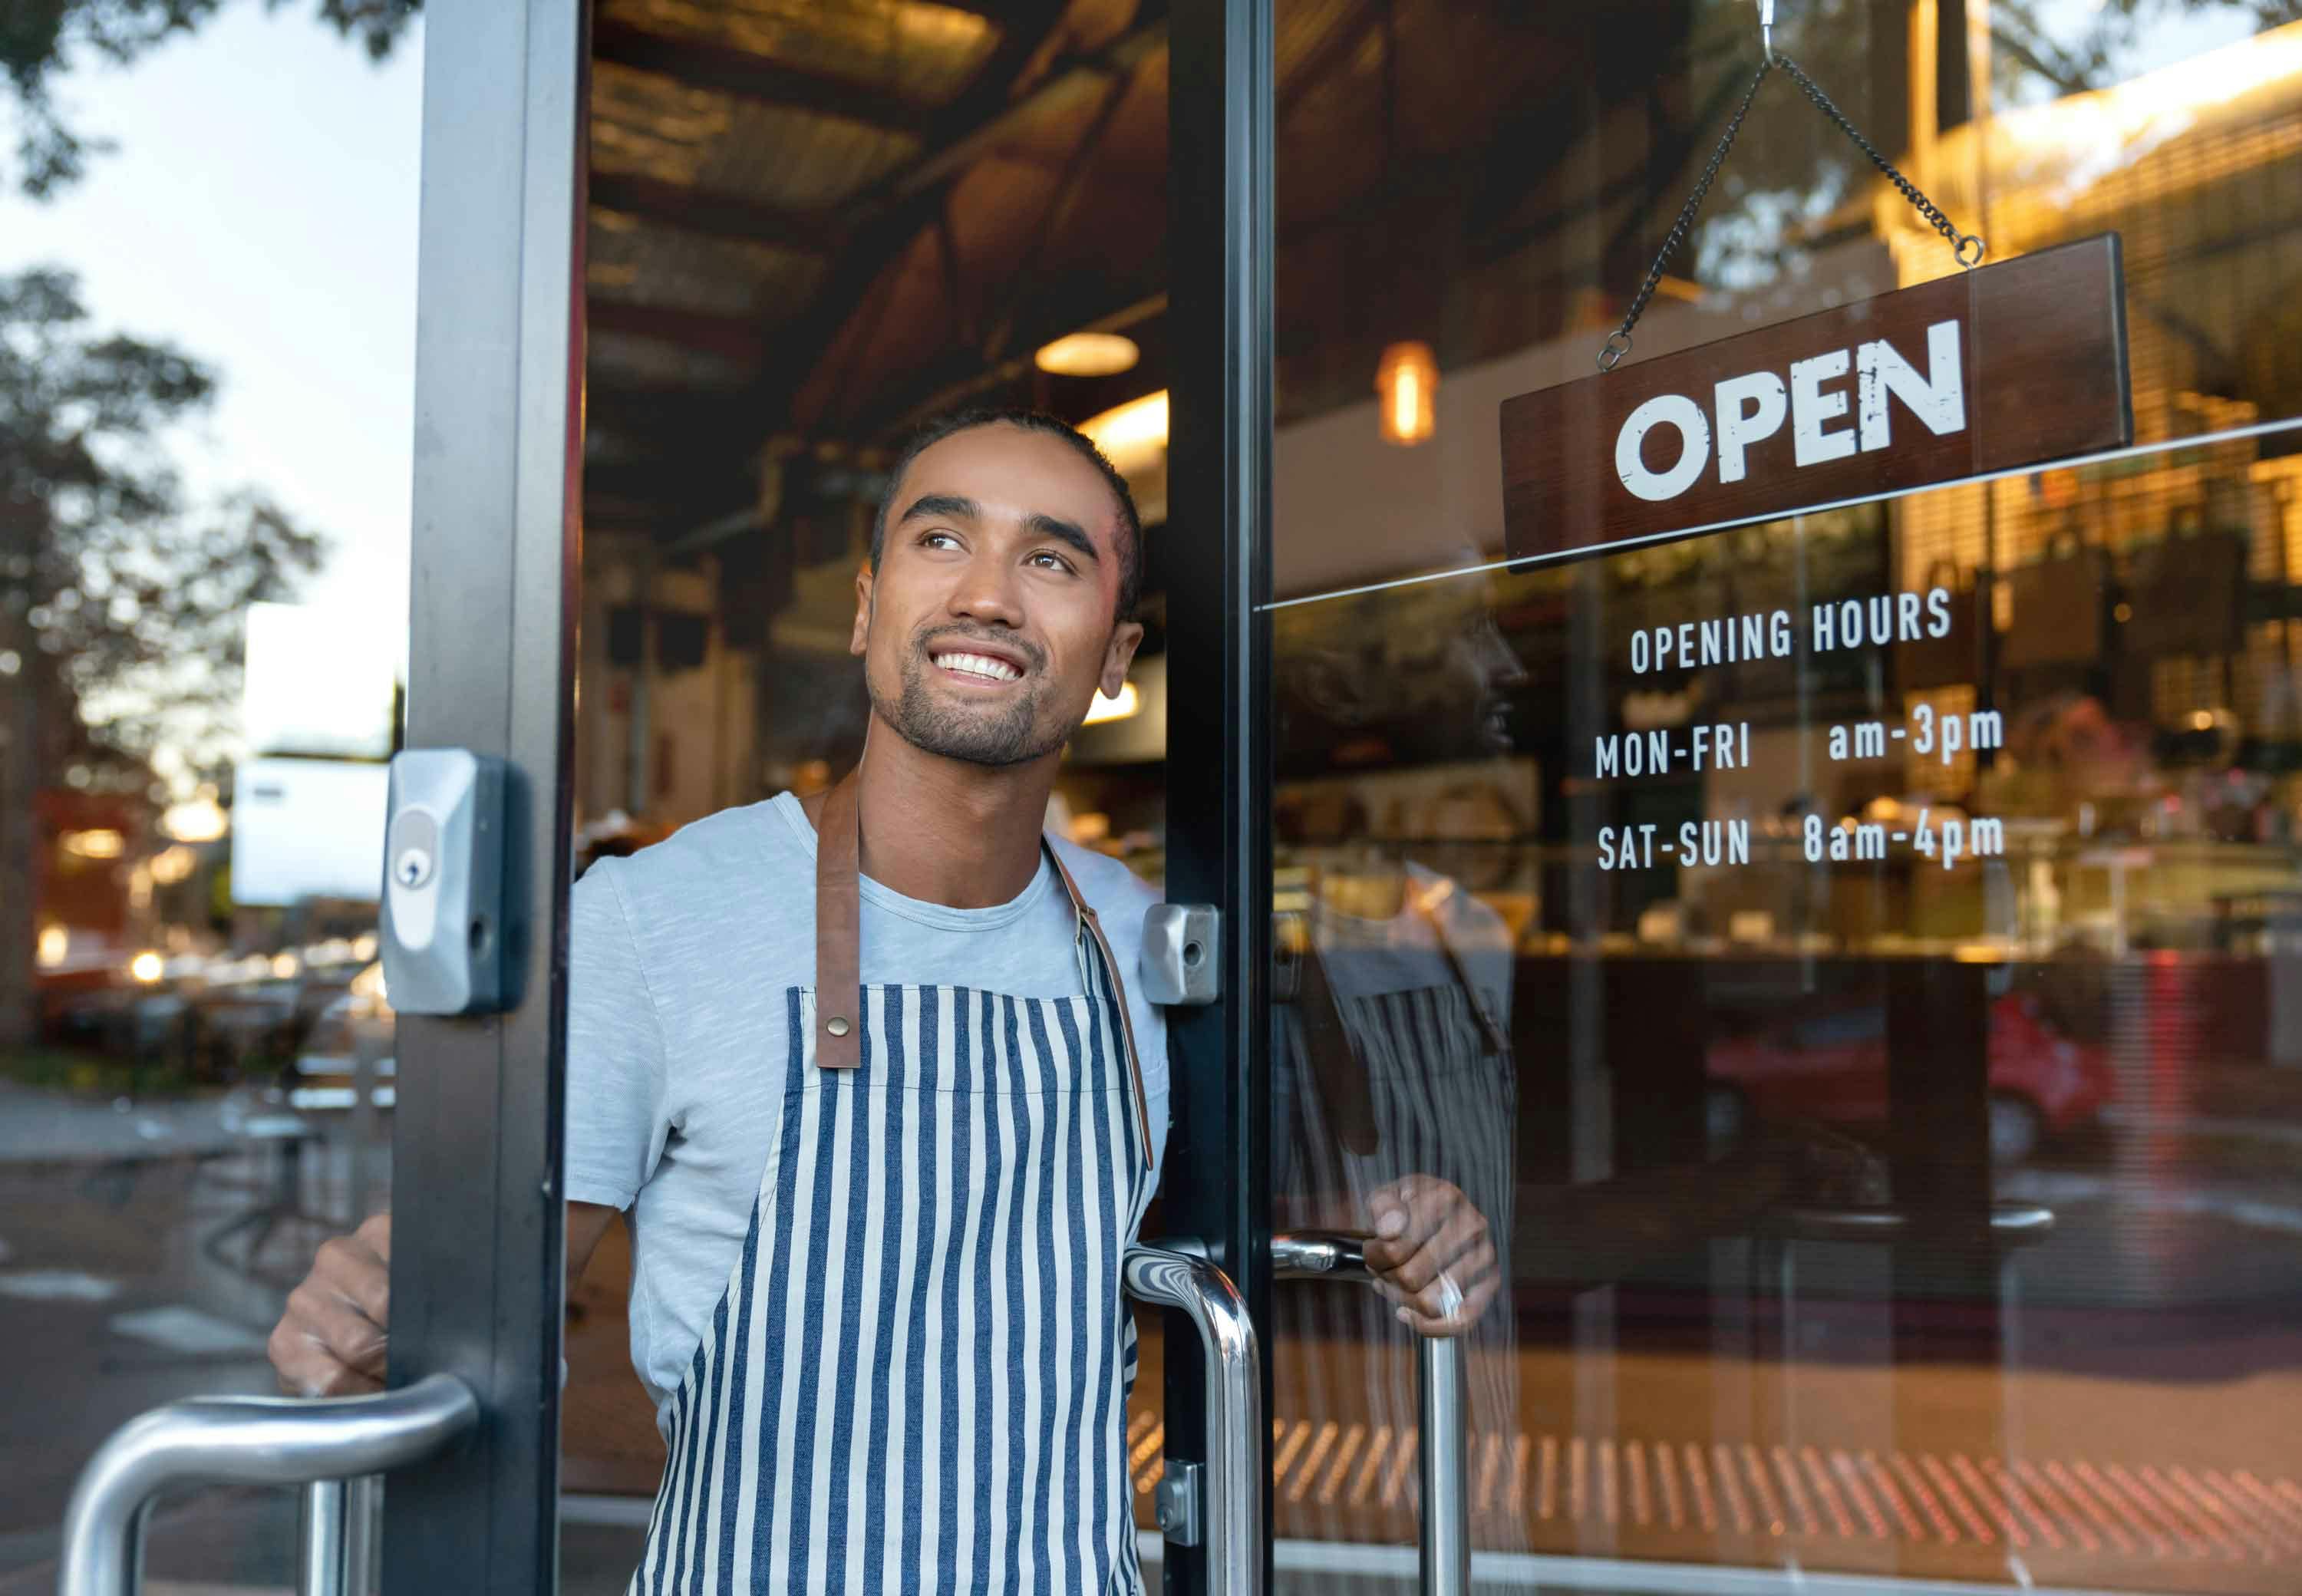 Business owner looking outside door with an open sign and opening hours.